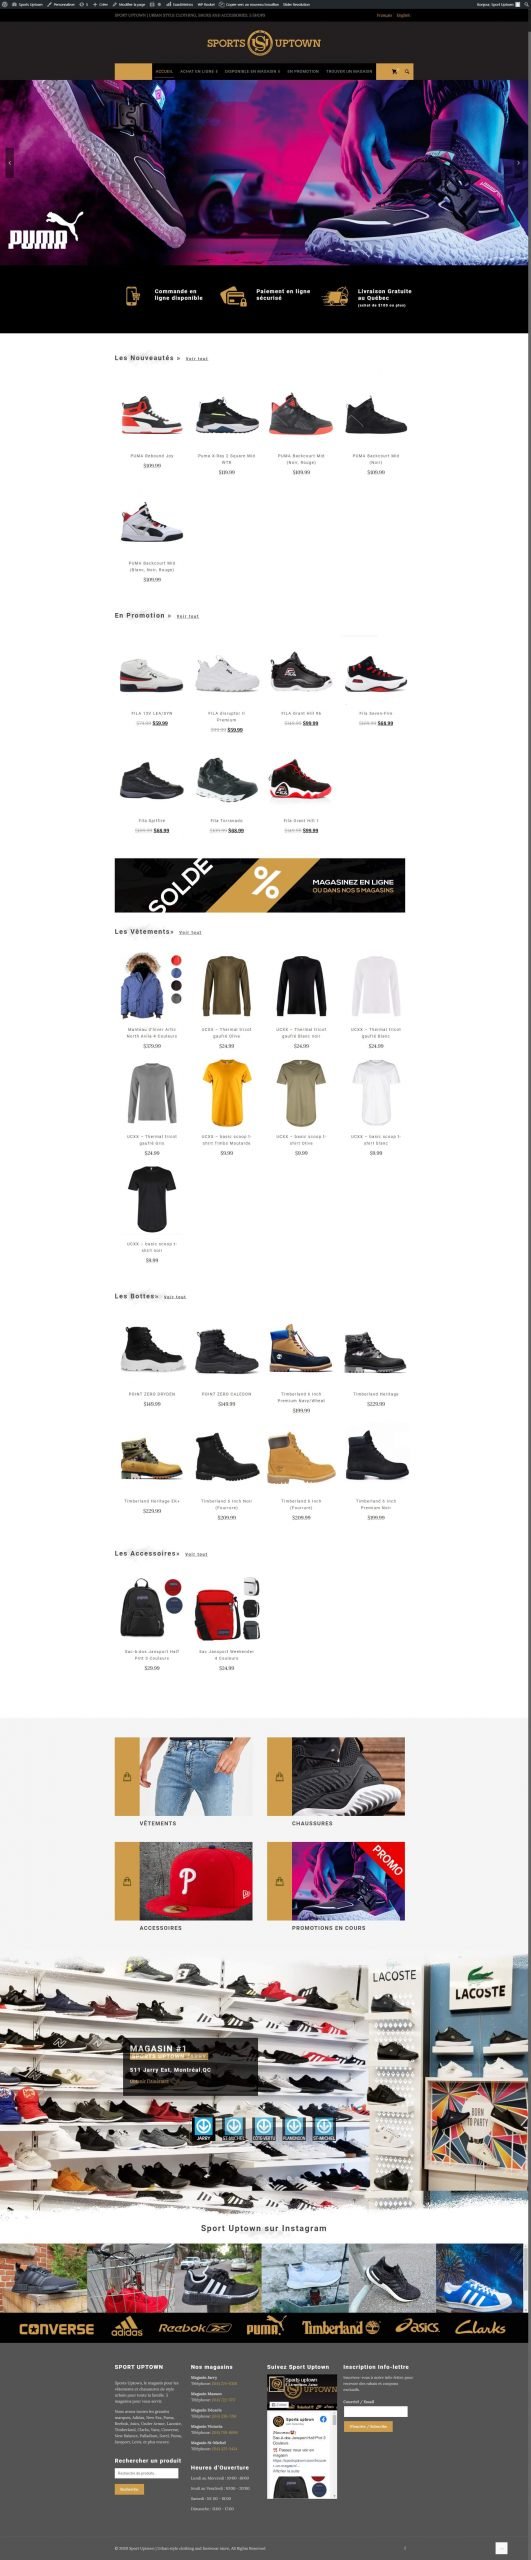 clothing store in montreal website design scaled